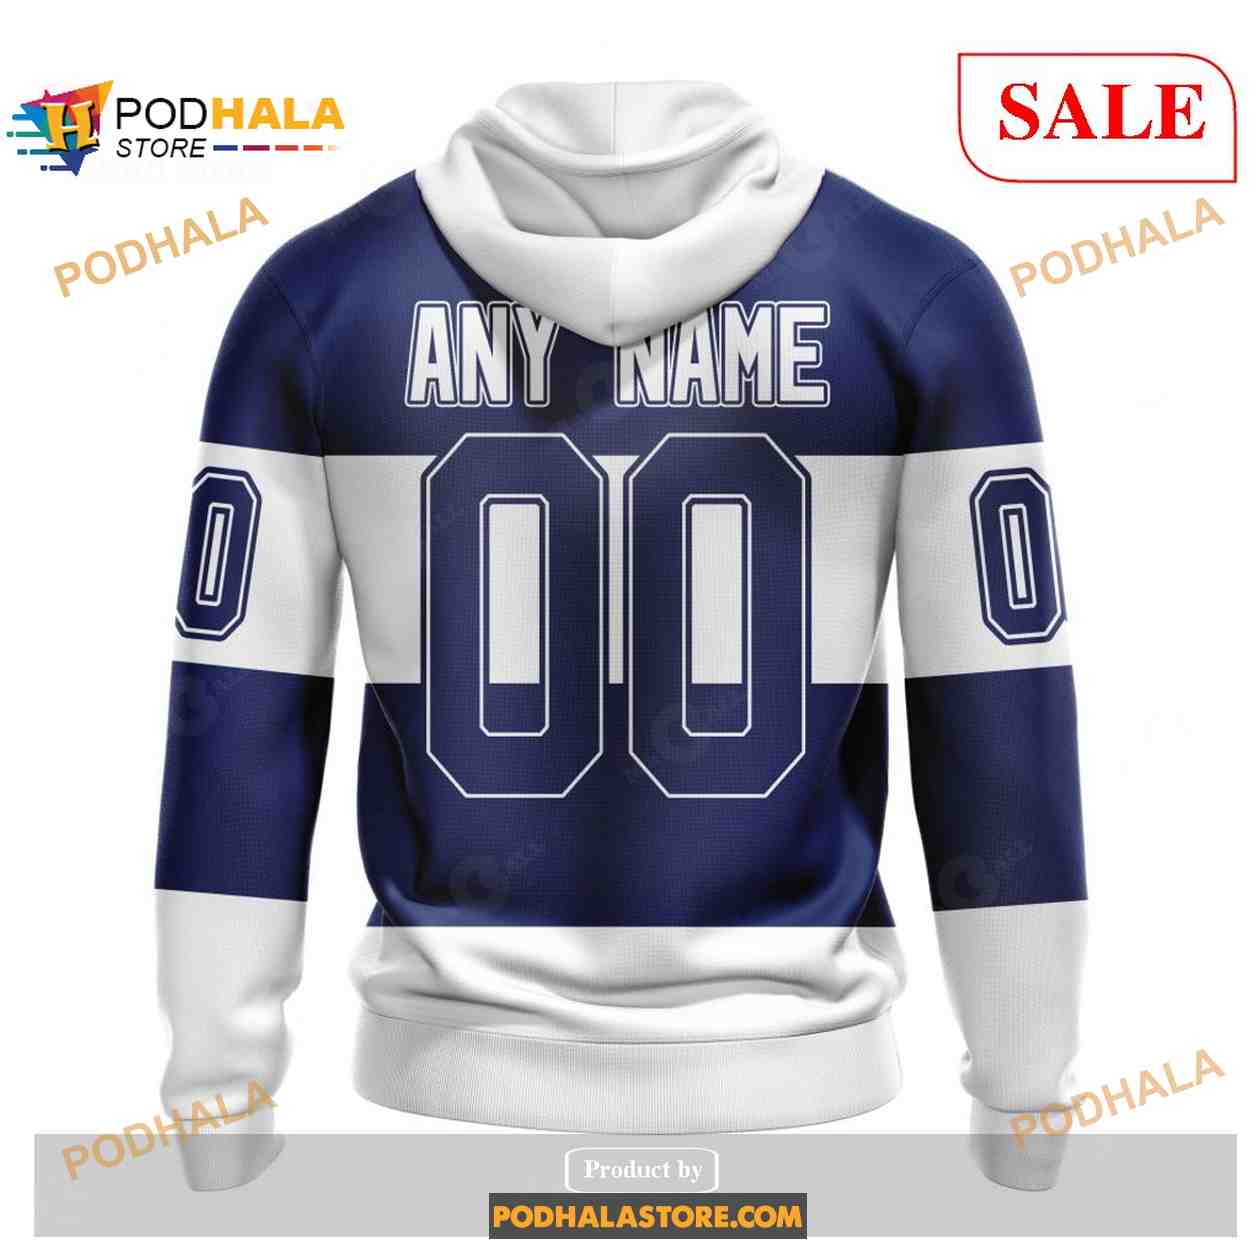 Custom Toronto Maple Leafs Sweatshirt NHL Hoodie 3D, You laugh I Laugh You  Cry I Cry - Bring Your Ideas, Thoughts And Imaginations Into Reality Today